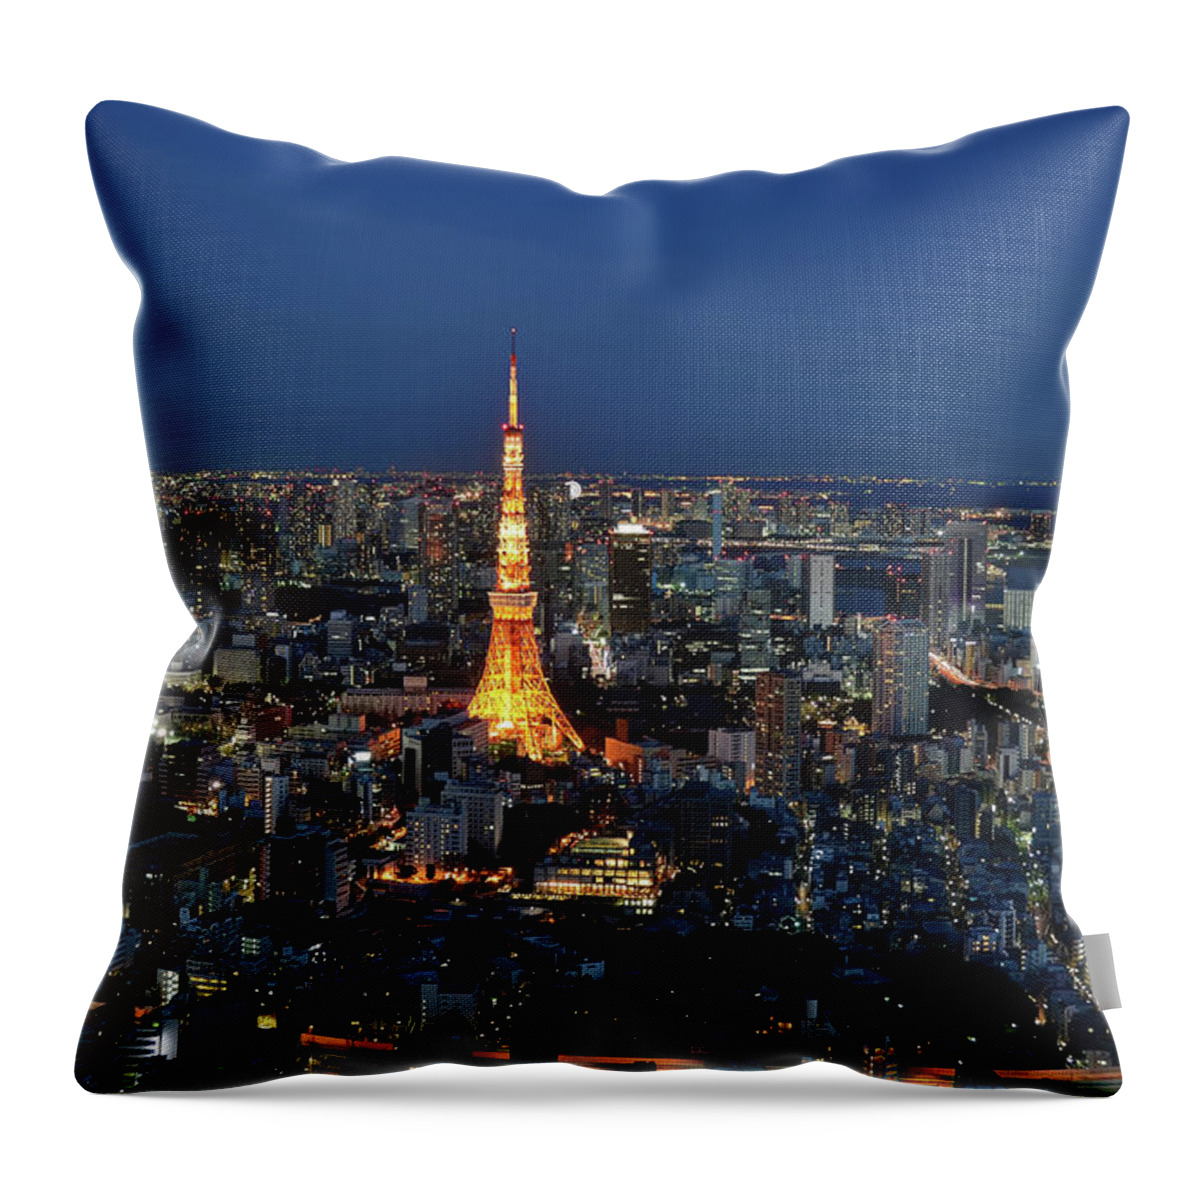 Tokyo Tower Throw Pillow featuring the photograph Looking At Tokyo Tower by Mhbs